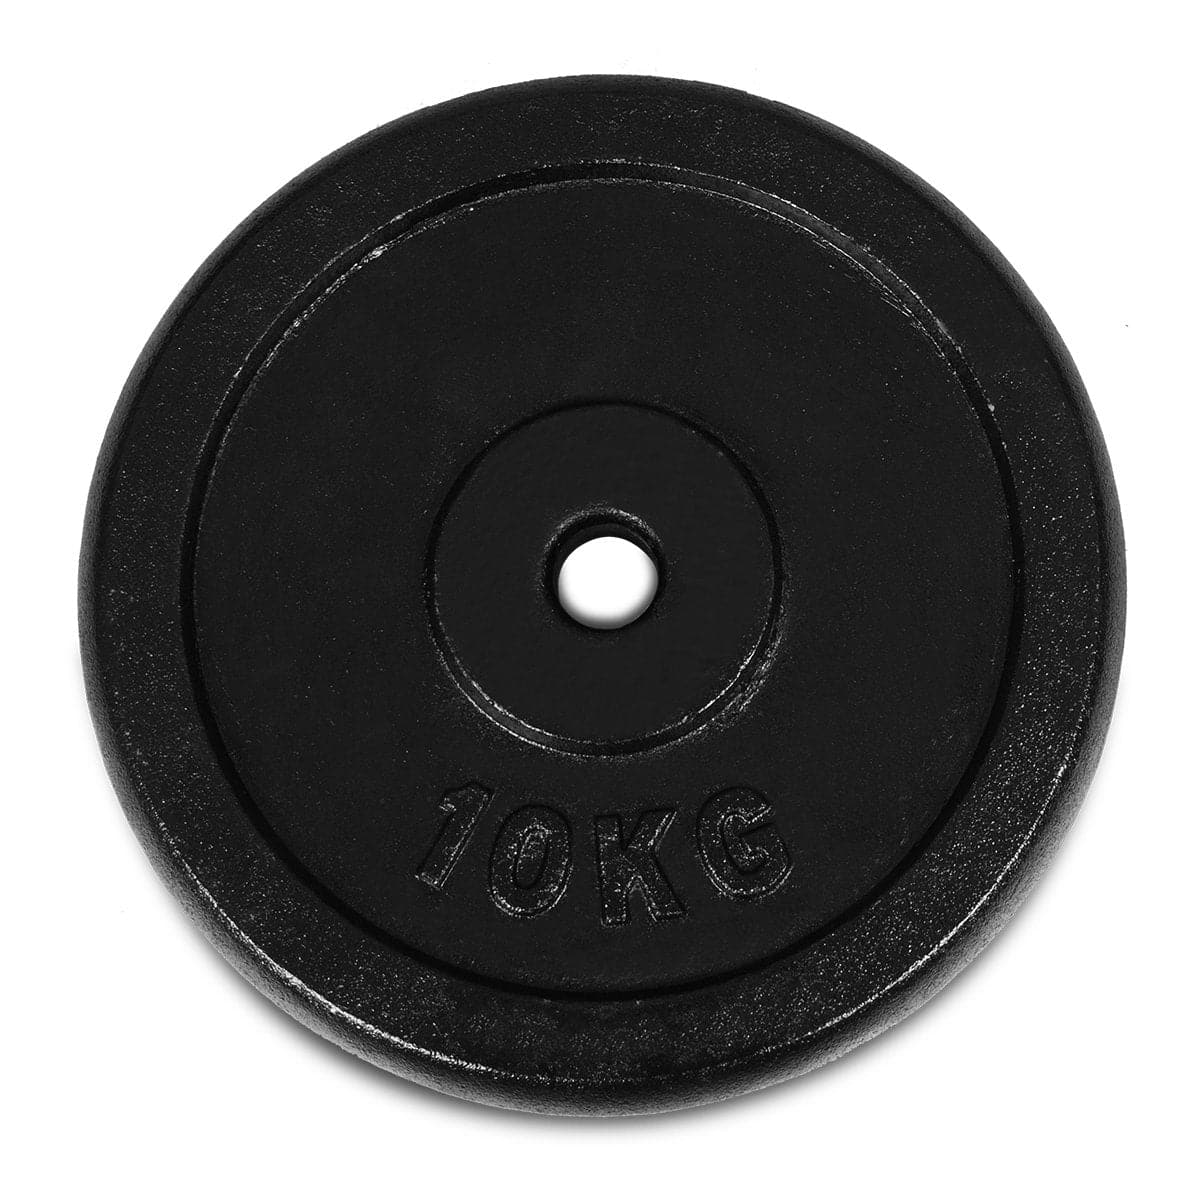 Black Cast Iron Weight Plates (for 25MM bars), Sold in pairs, $4/kg starting from: Musclemania Fitness MegaStore